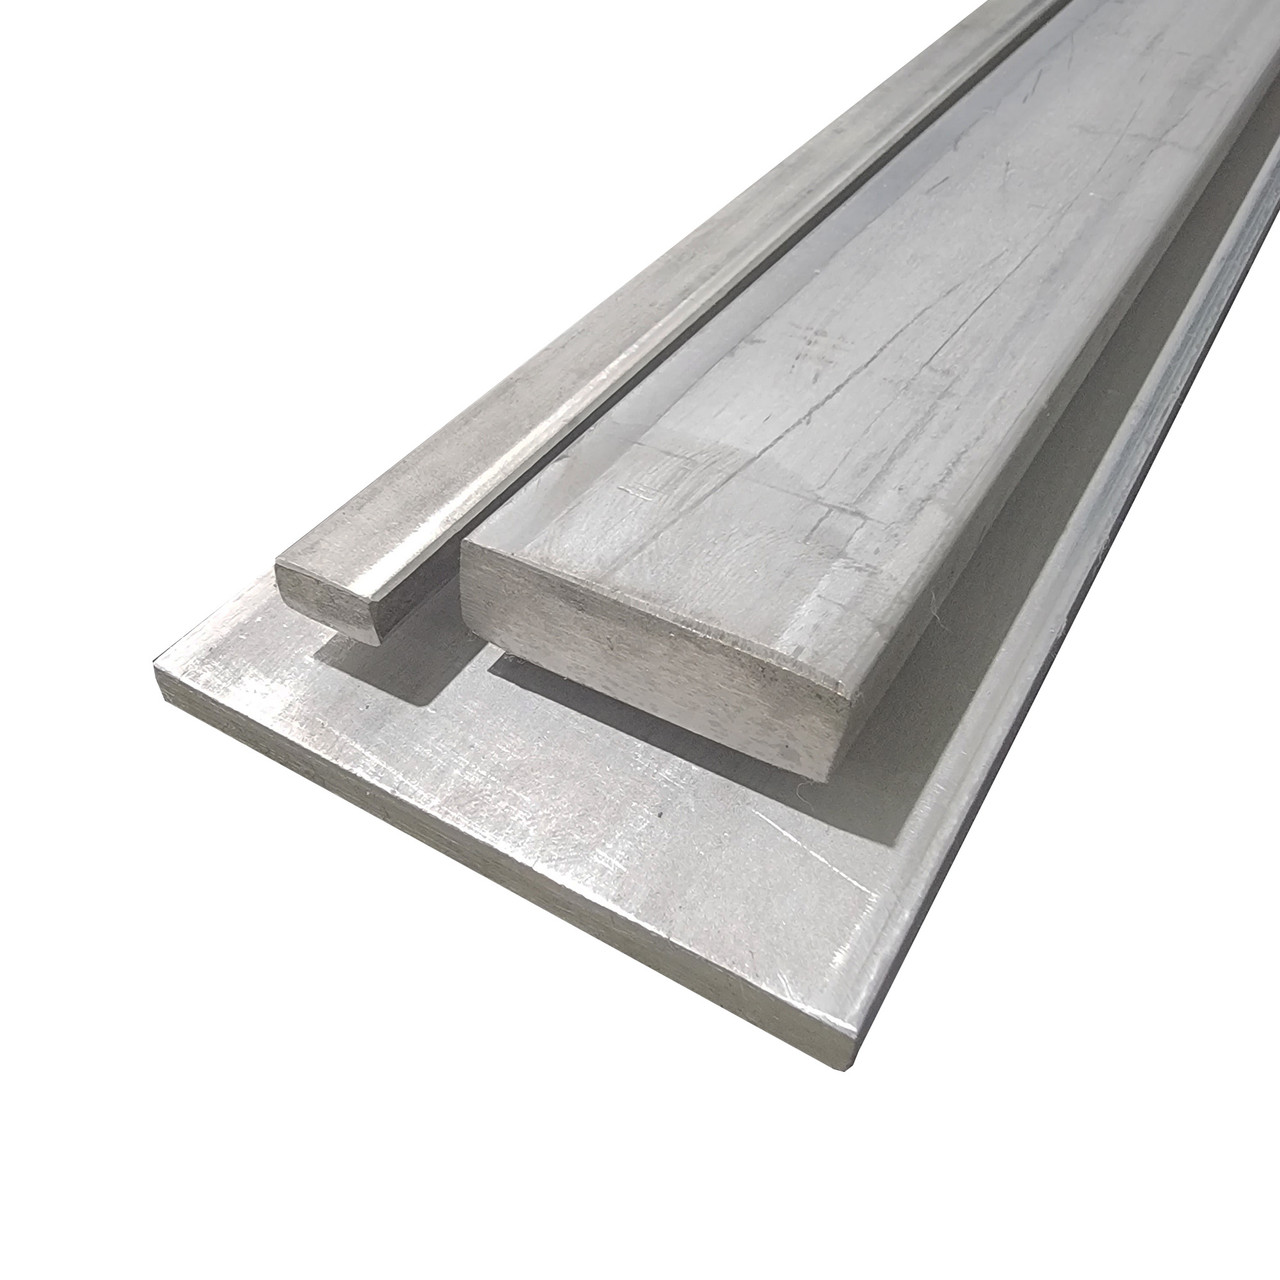 0.250" x 2.75" x 39", 304 Stainless Steel Plate Flat Bar, Hot Rolled